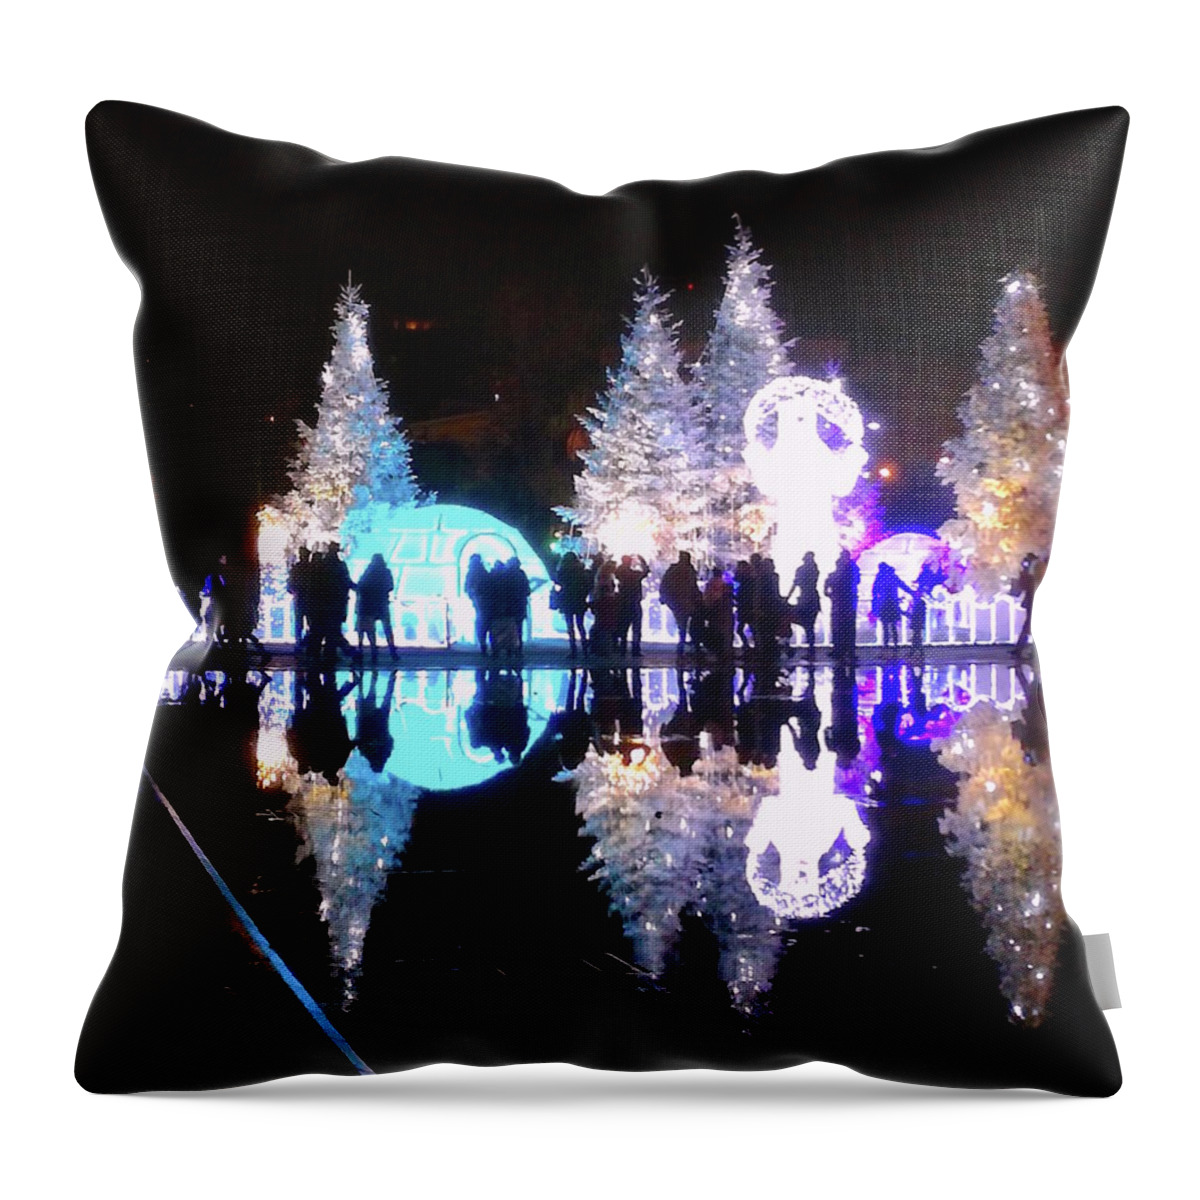 Christmasnizza Throw Pillow featuring the photograph Christmas In Nizza, Southern France by Monique Wegmueller